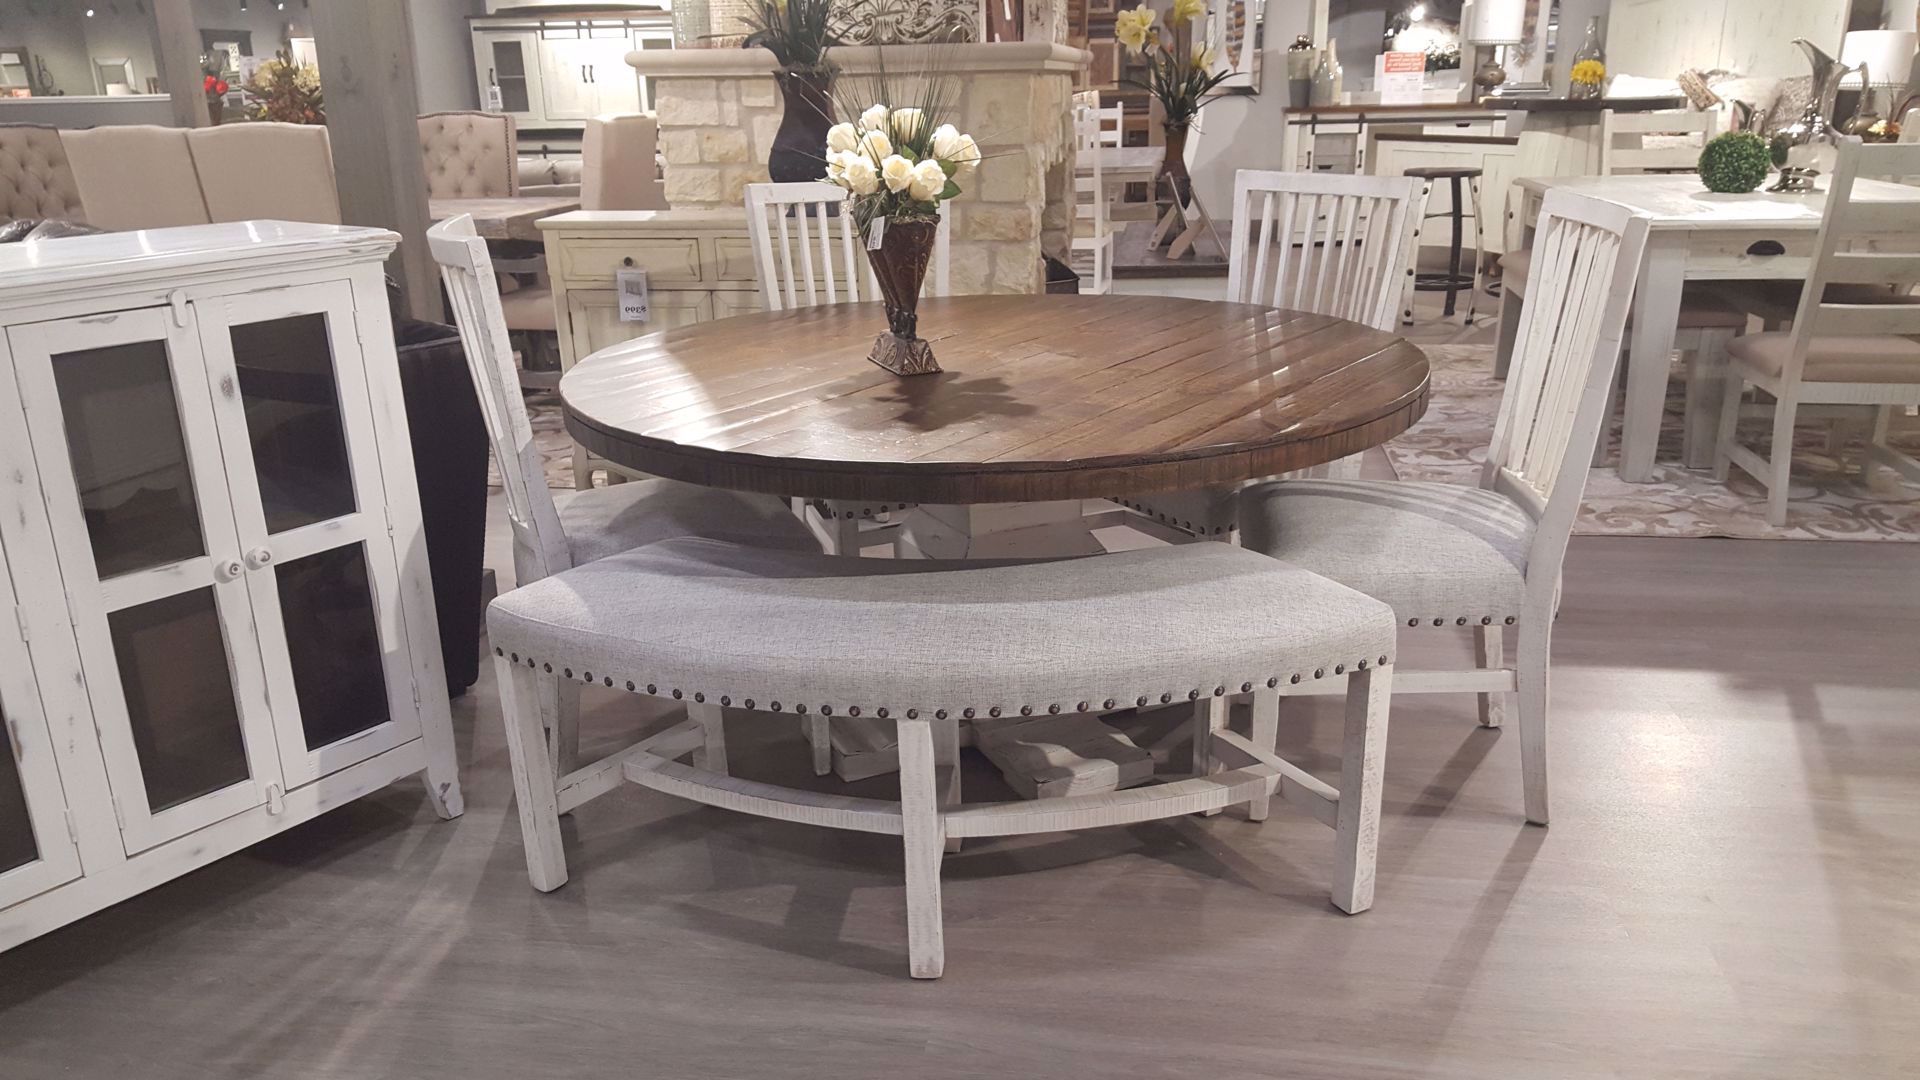 2017 Round Dining Tables Throughout Condesa Round Dining Set (View 11 of 30)